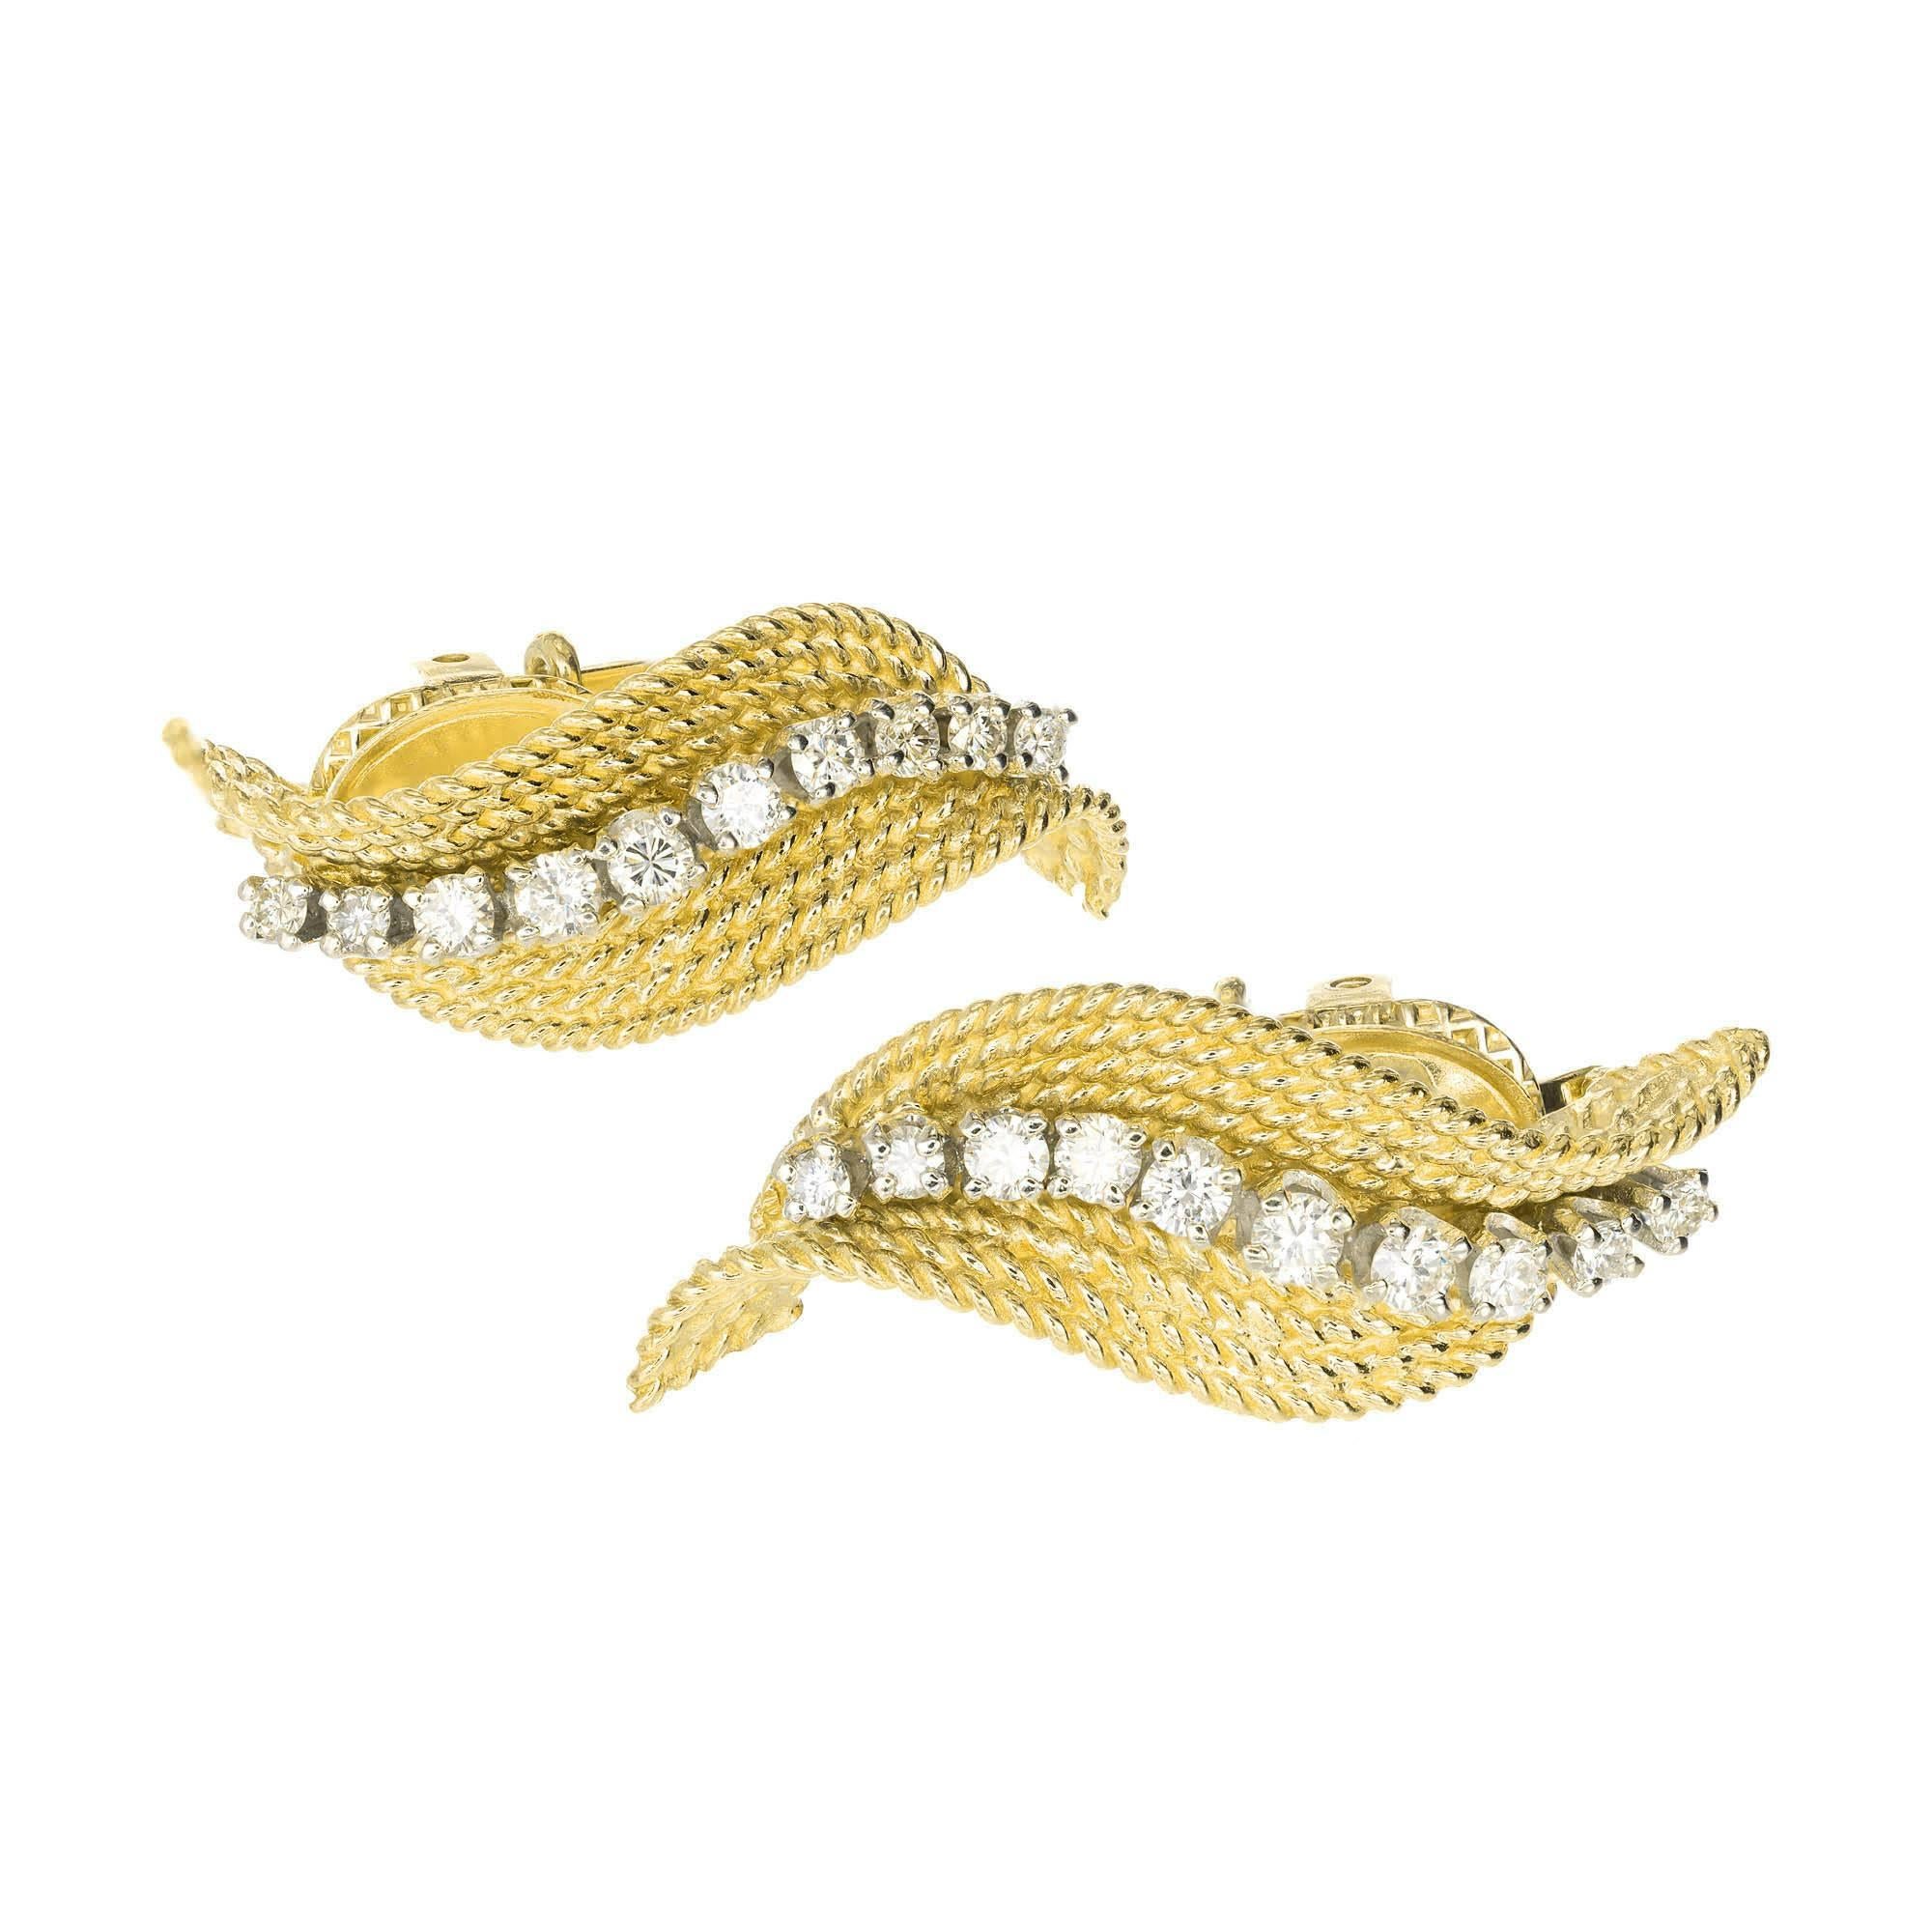 1950s Tiffany & Co 18k yellow and white gold patented adjustable clip and post swirl diamond earrings. 

20 round diamonds, approx. total weight .70cts, F – G, VS
18k yellow and white gold
12.2 grams
Tested and stamped: 18k
Hallmark: Tiffany & Co